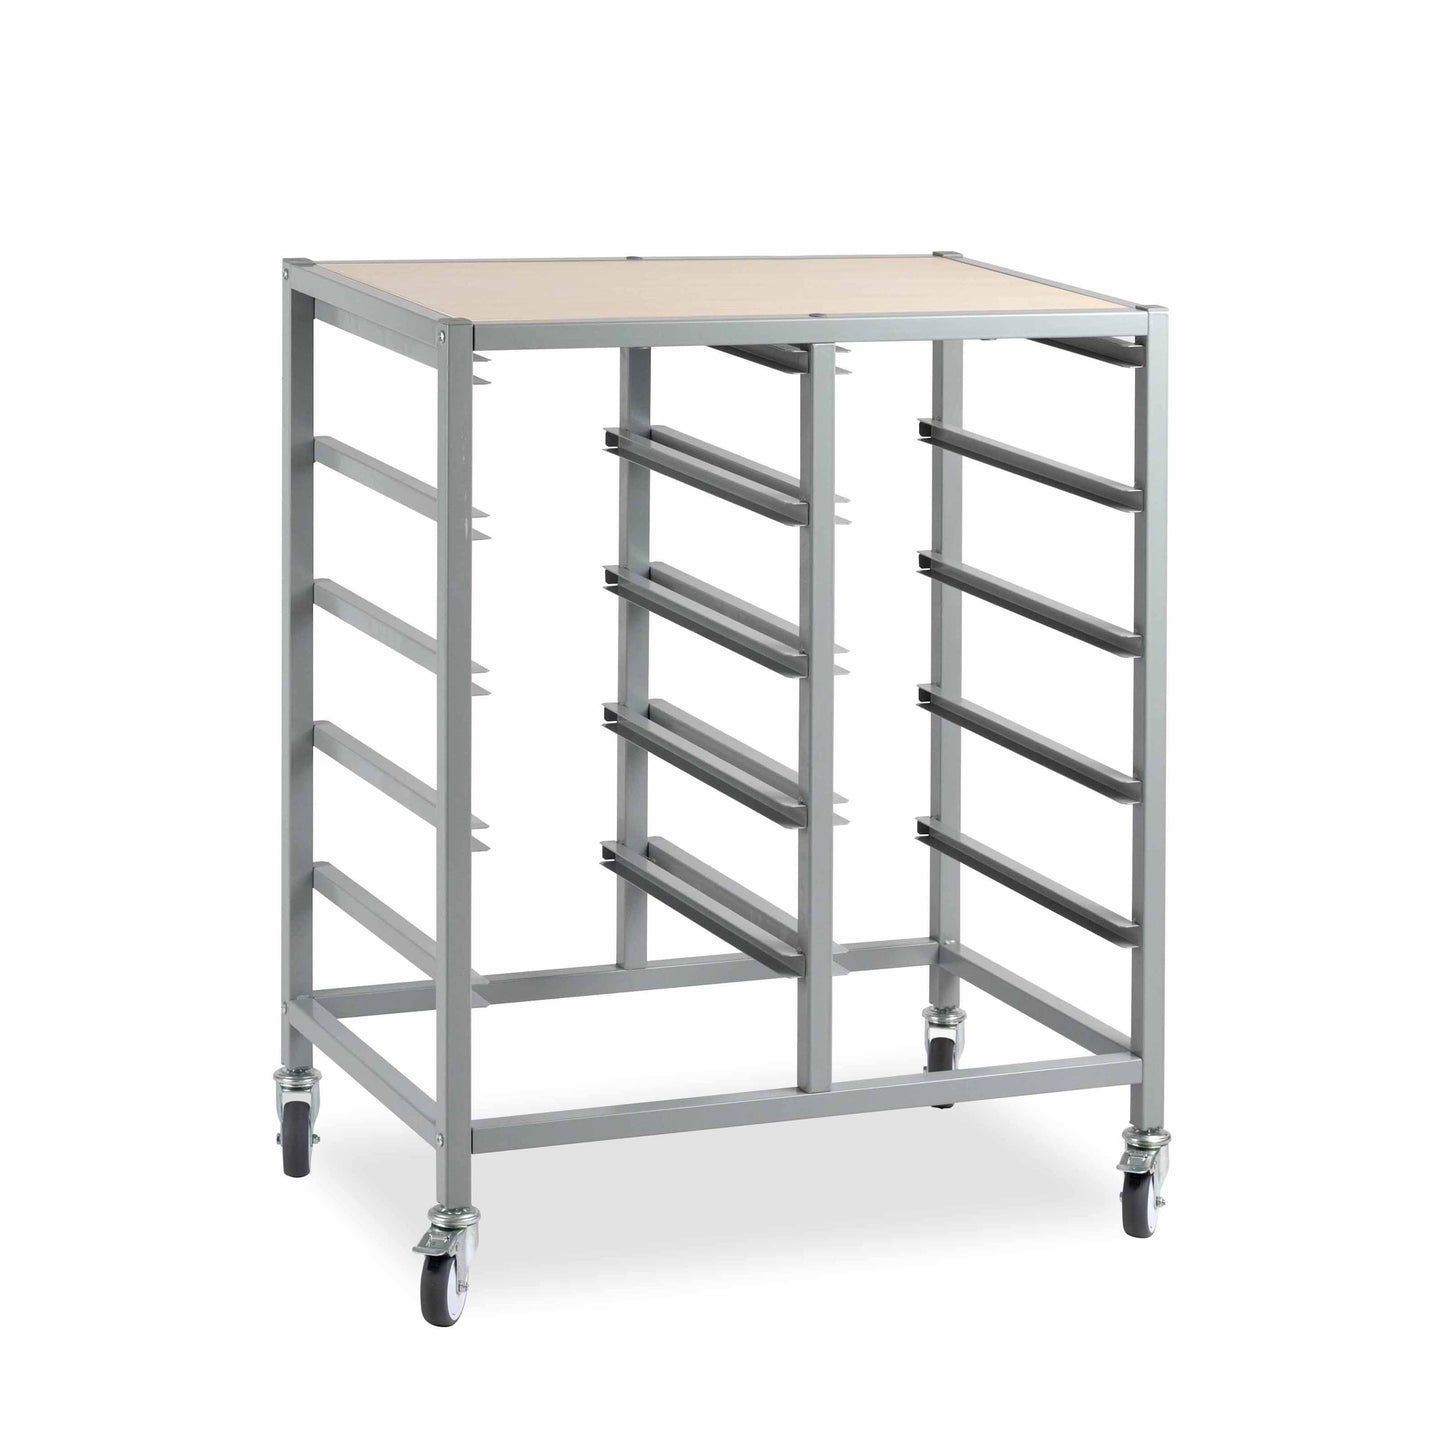 Mobile School Storage | Classroom Storage  Australia | 10 Tote Tray Double Trolley Only no tubs